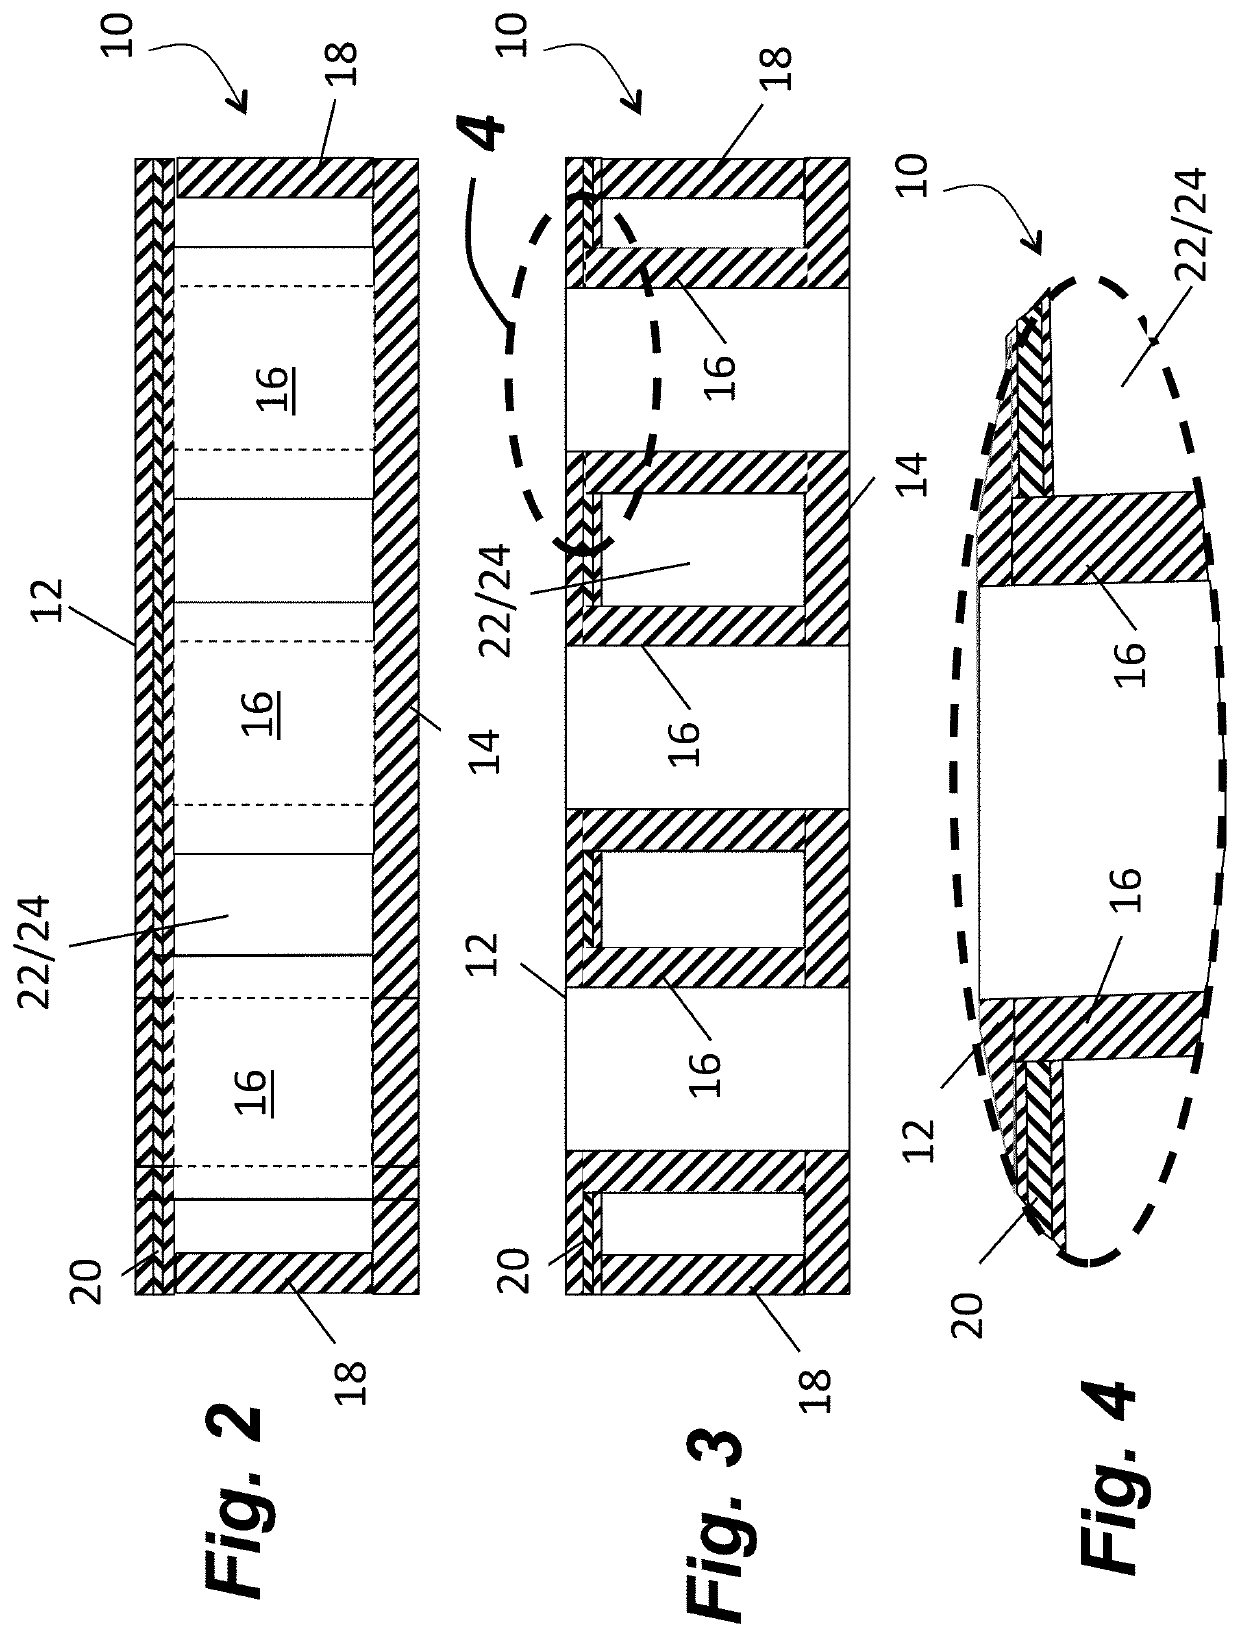 Fiber-reinforced impact-dissipating liners and methods for fabricating fiber-reinforced impact-dissipating liners